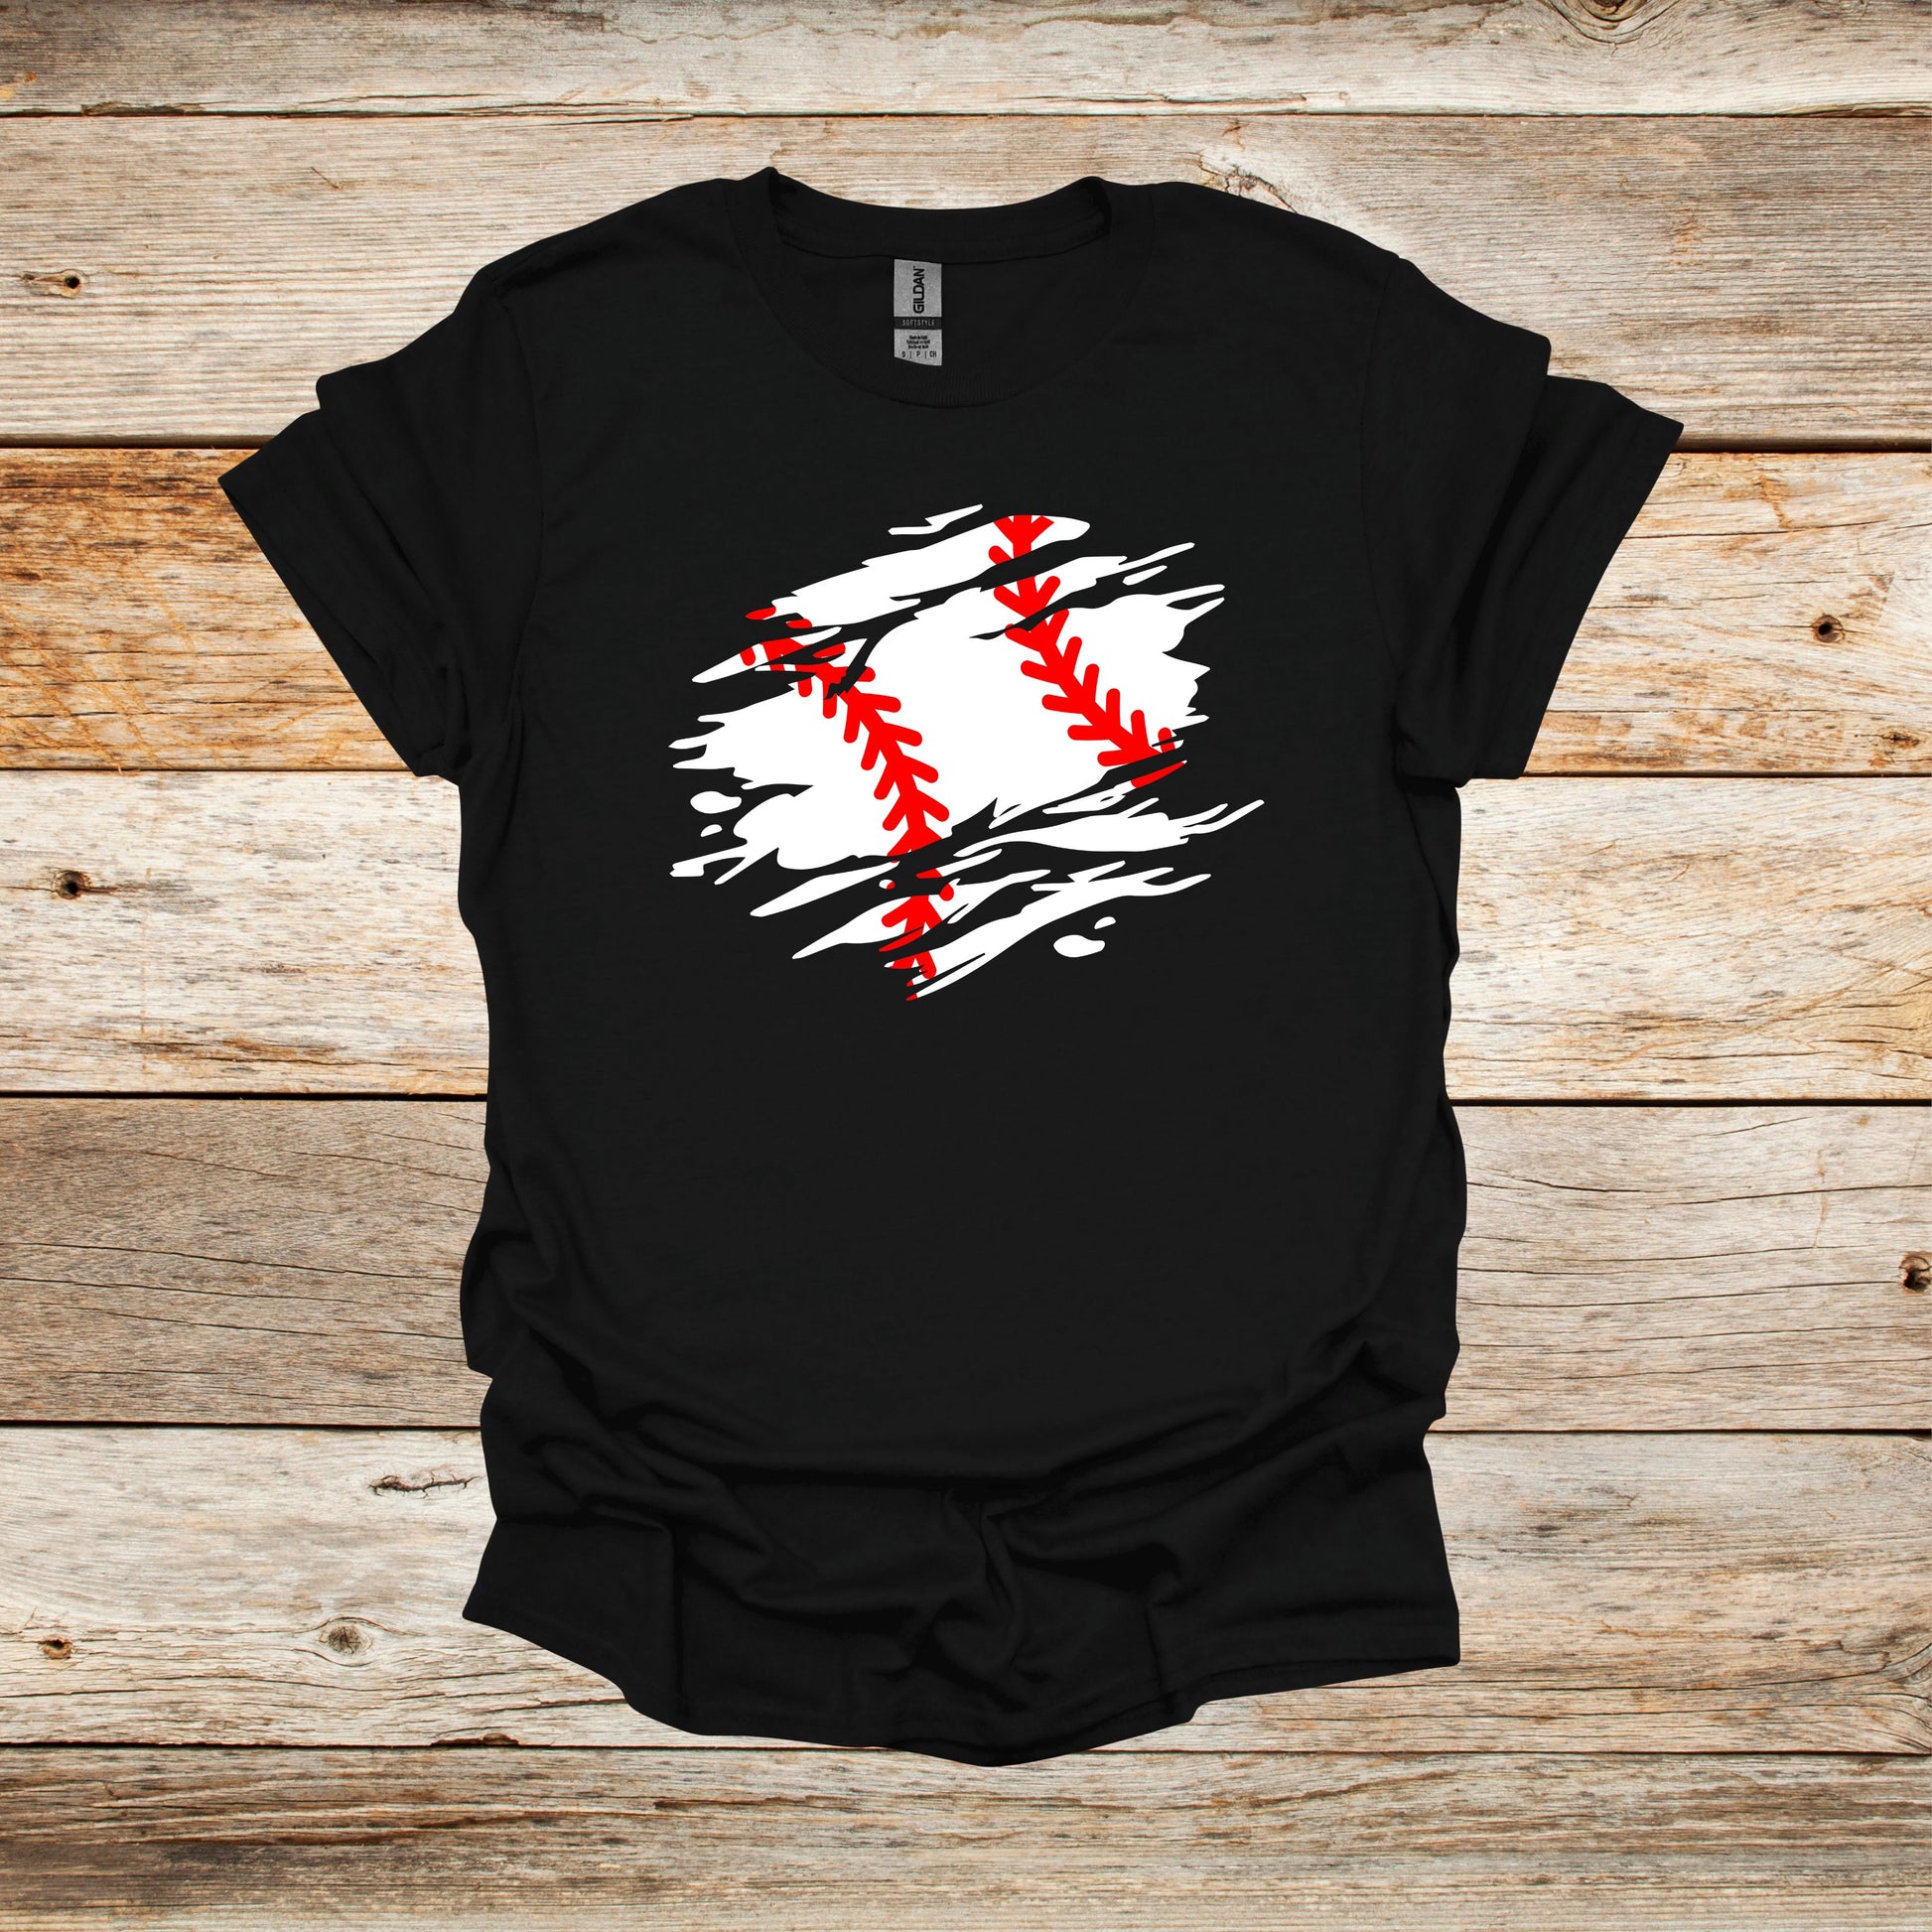 Baseball T-Shirt - Adult and Children's Tee Shirts - Sports T-Shirts Graphic Avenue Black Adult Small 